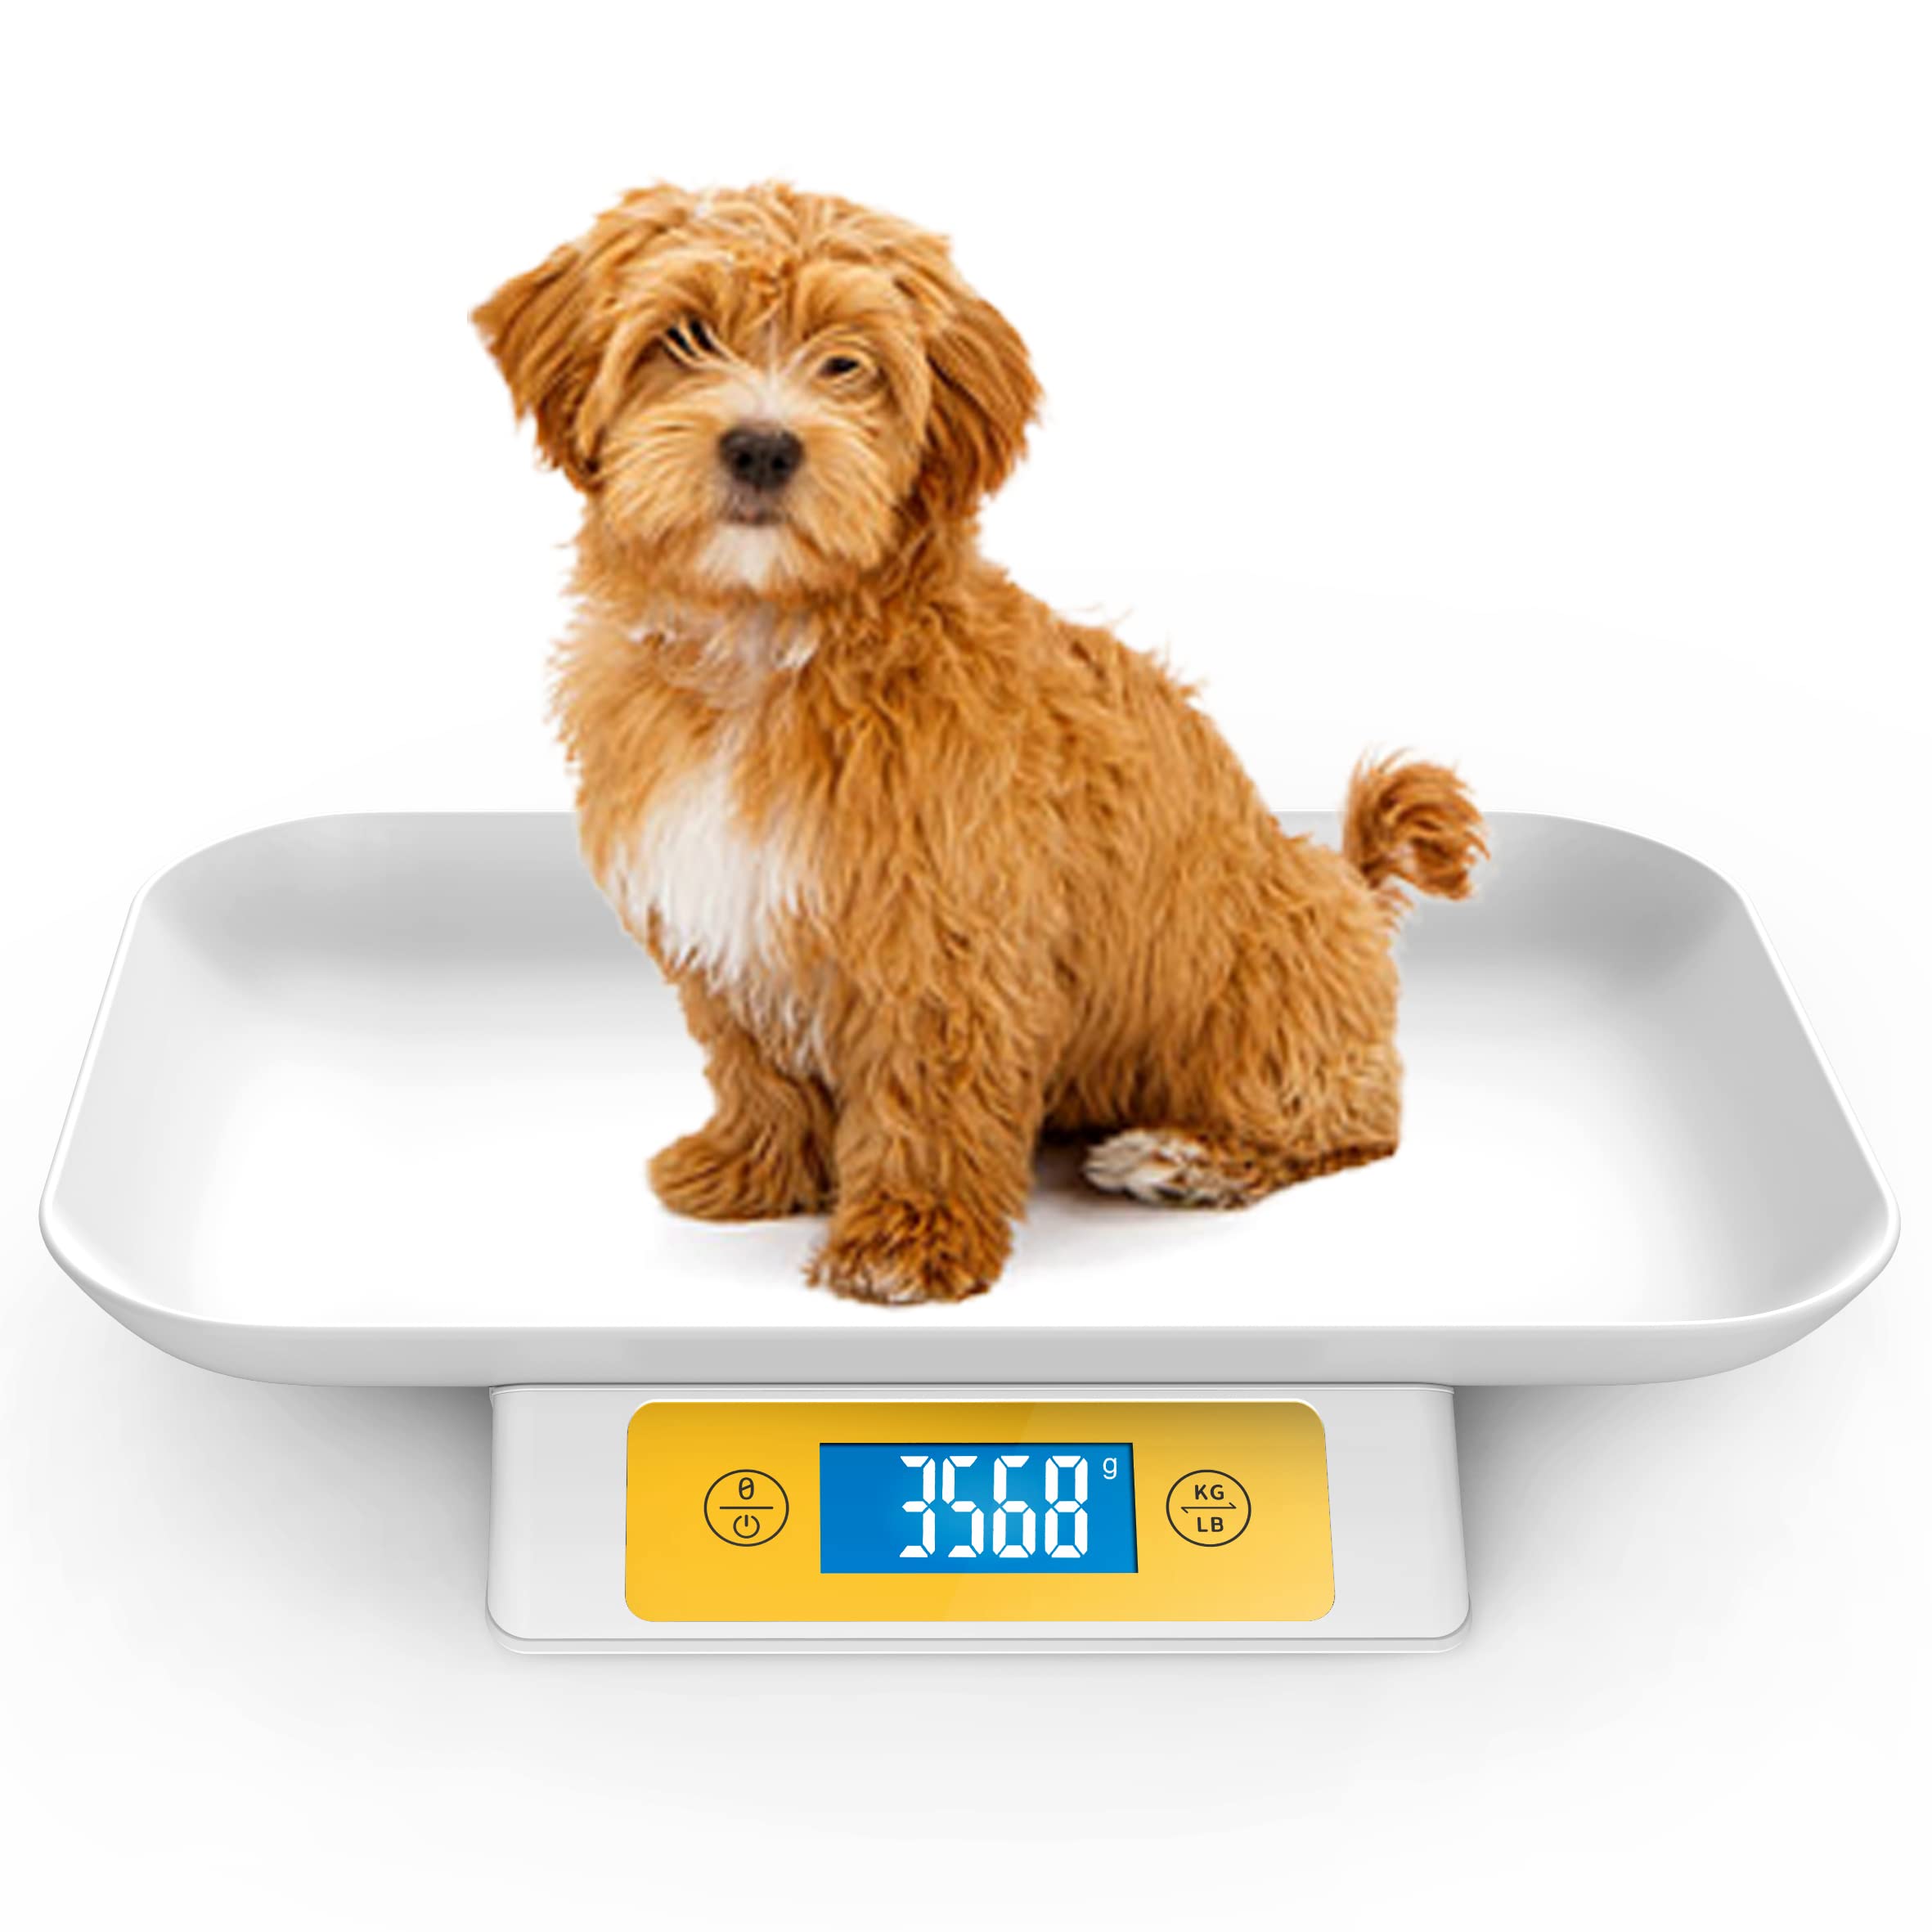 Tree LCVS-330LB Pet Weight Scale 330 lb x 0.1 lb Tempered Glass